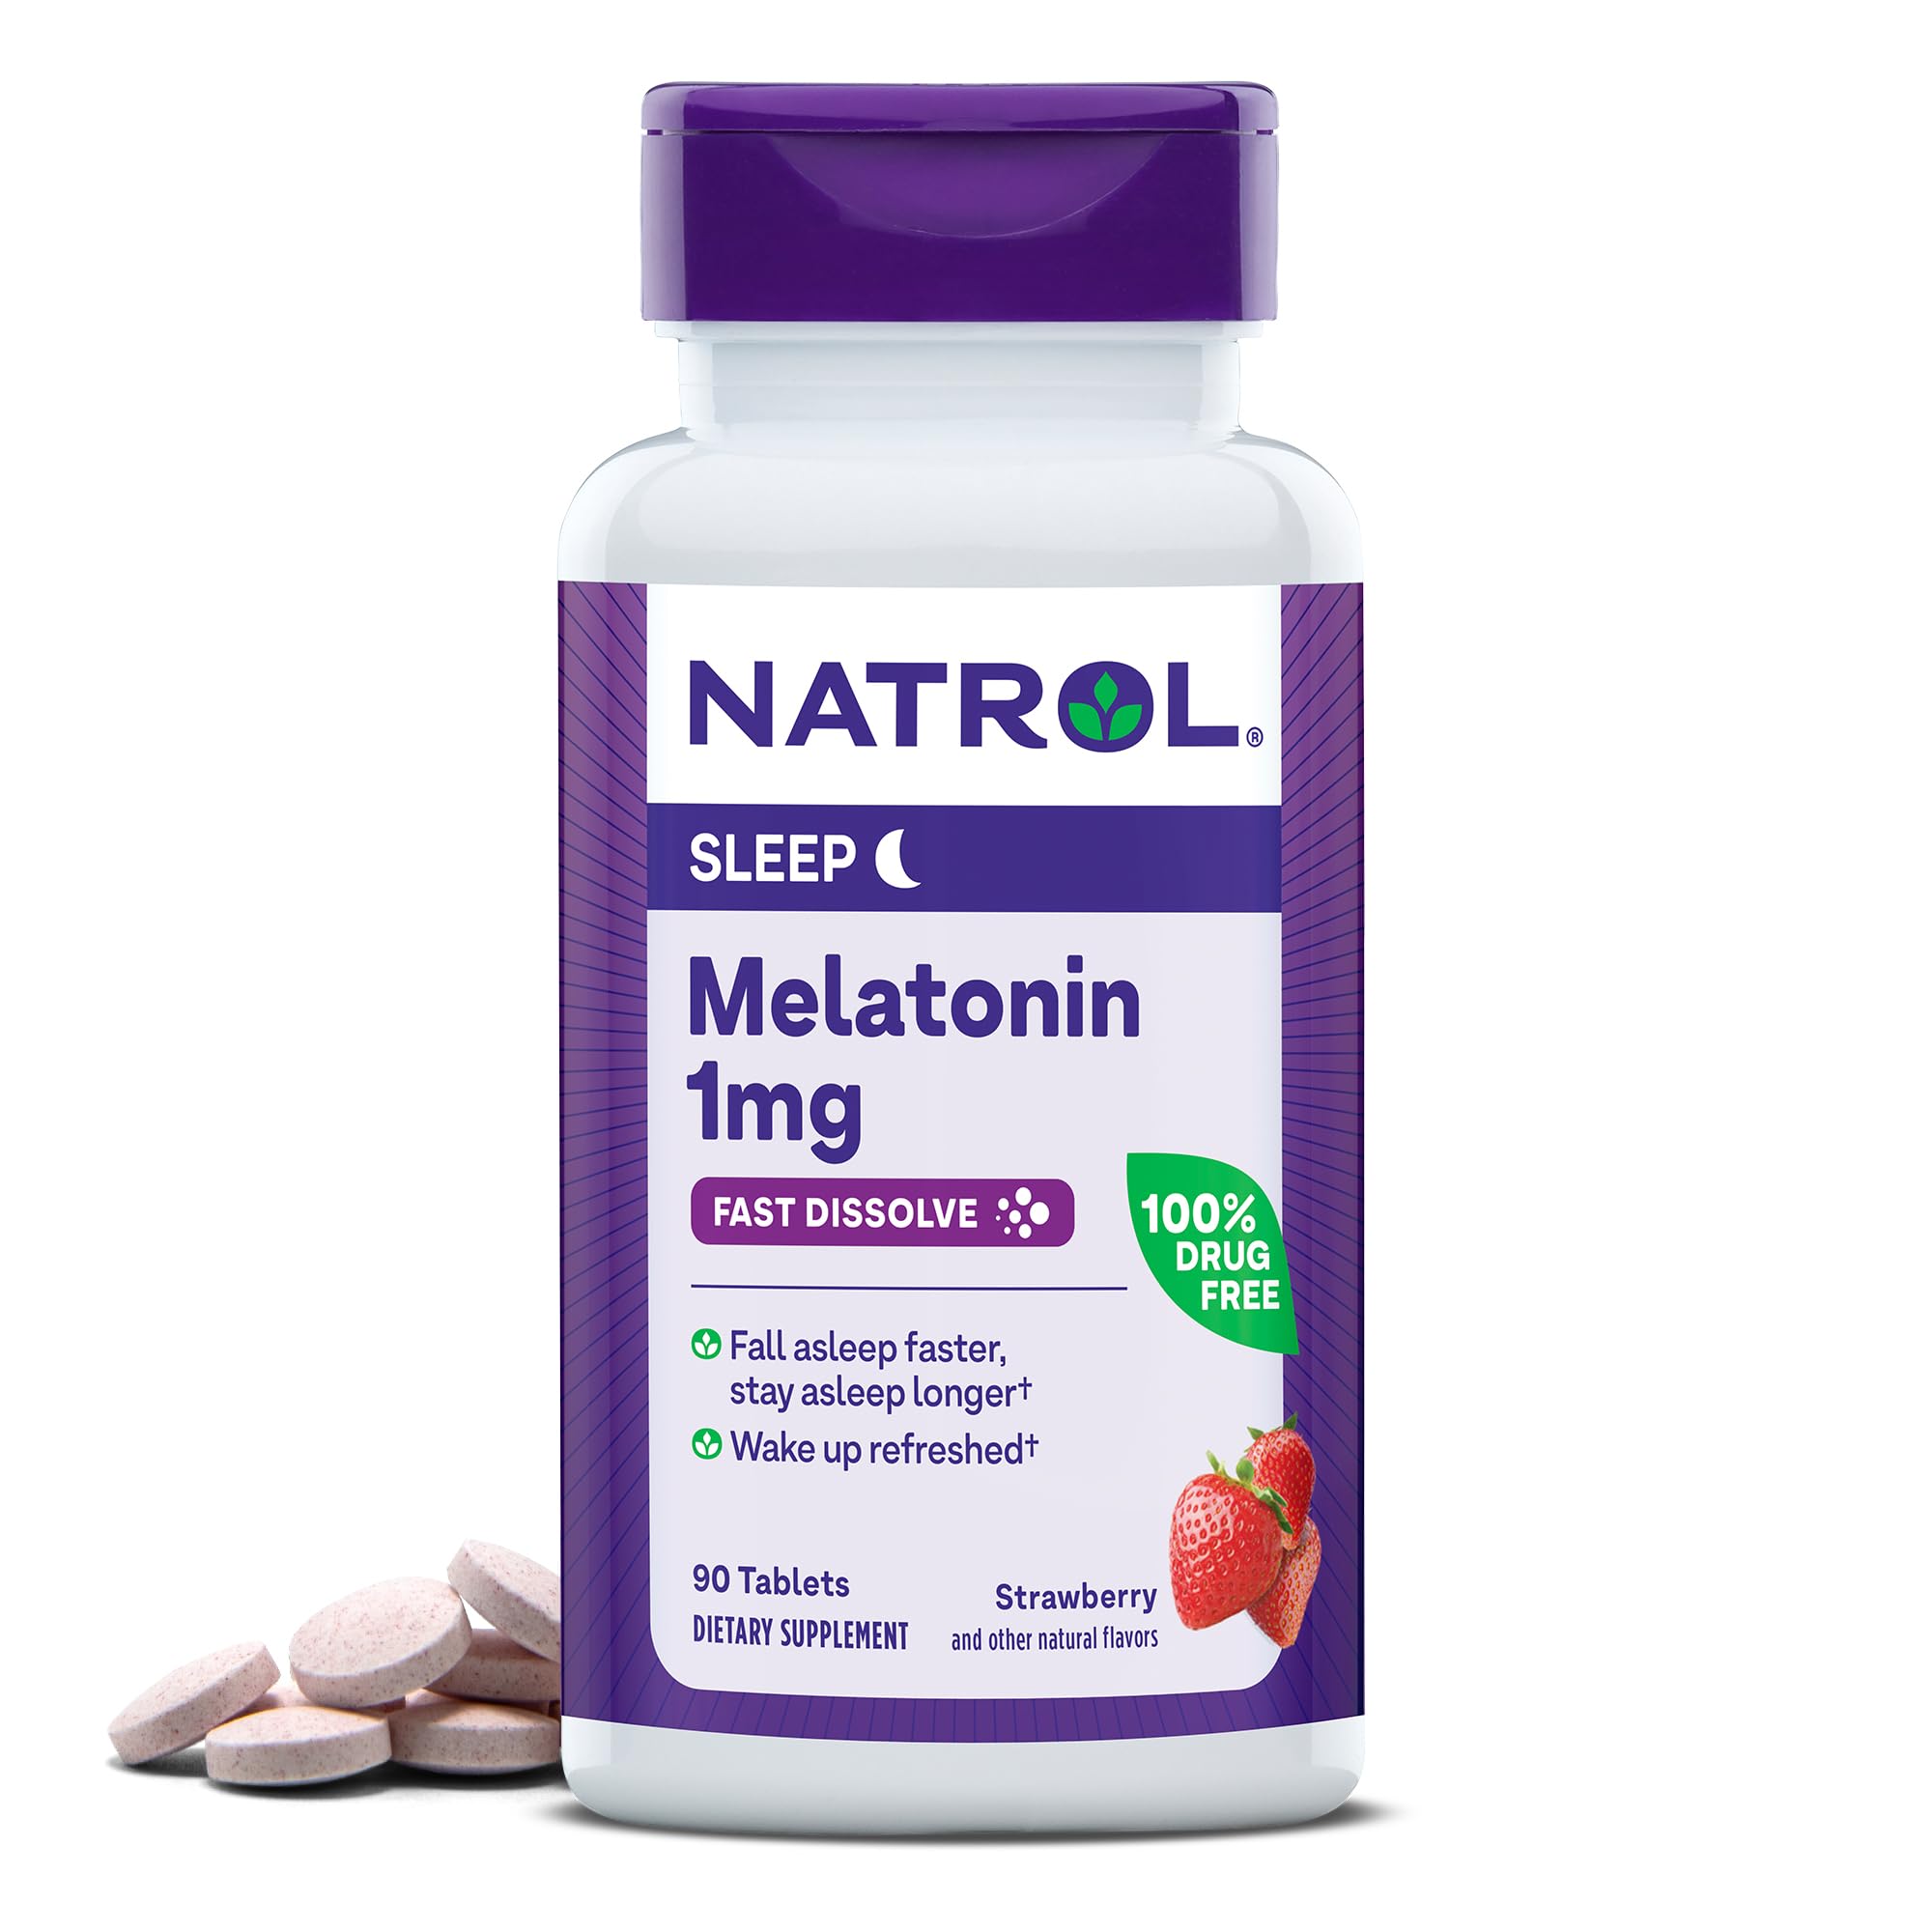 Natrol Melatonin Fast Dissolve Tablets, Helps You Fall Asleep Faster, Dissolves in Mouth, Strawberry Flavor, 1mg, 90 Count画像